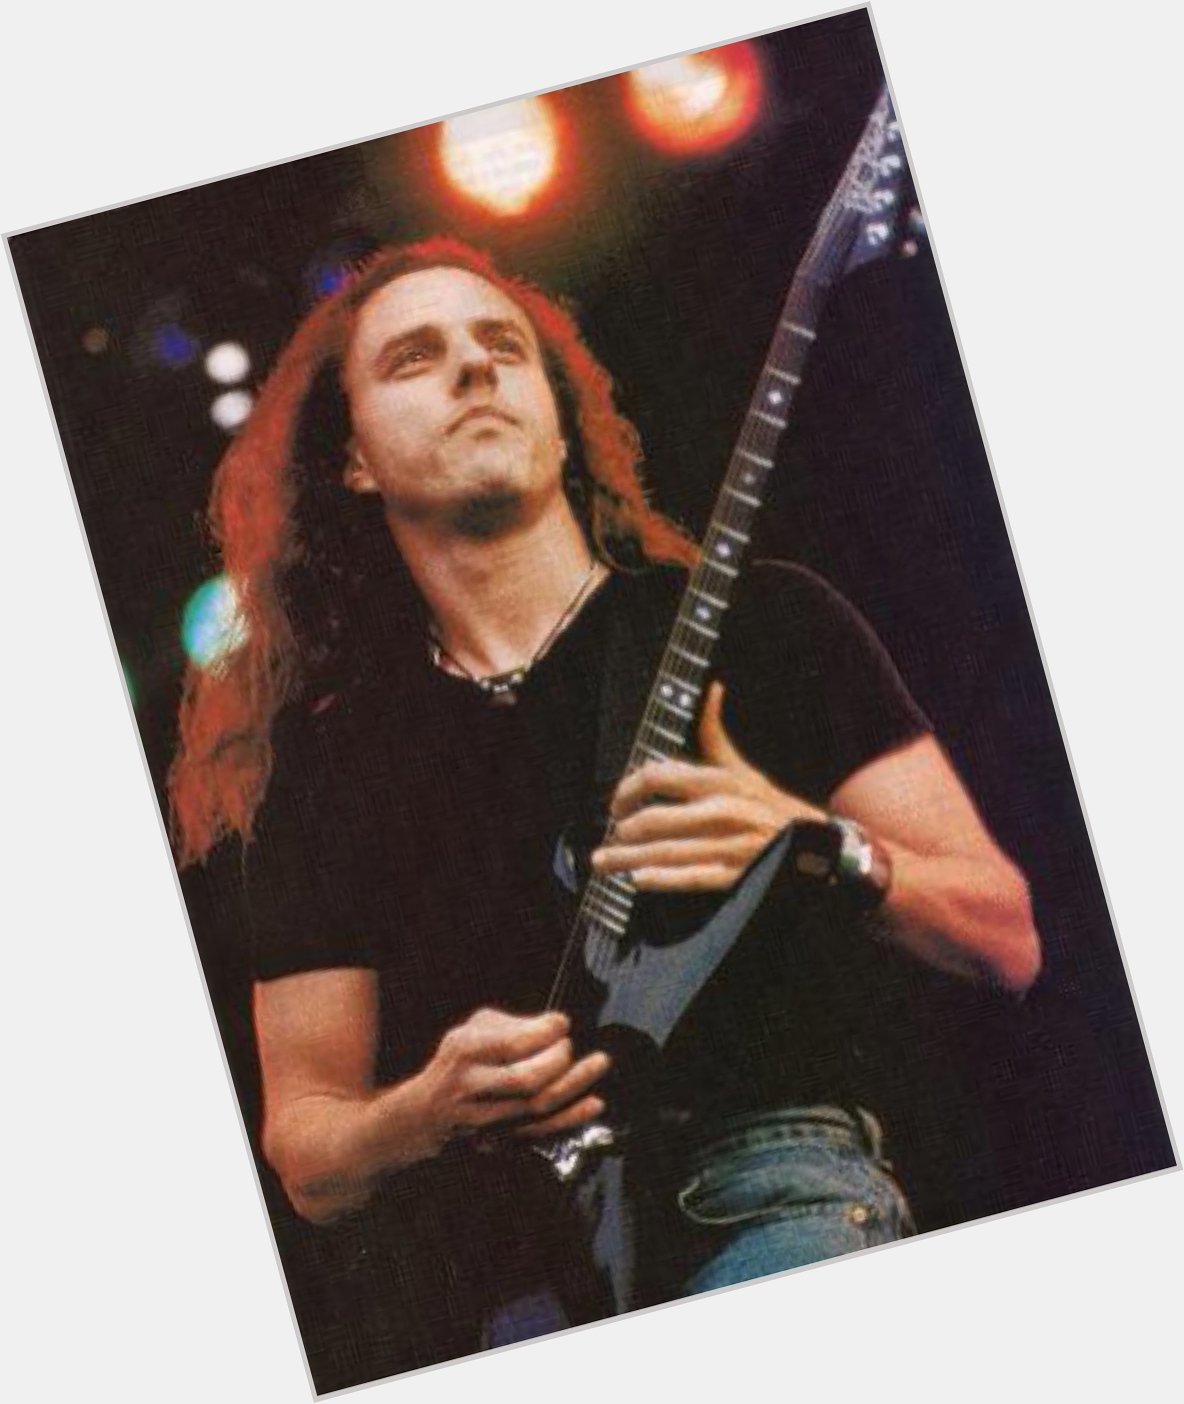 Happy Birthday to Chuck Schuldiner, one of my favorite musicians of all time. 